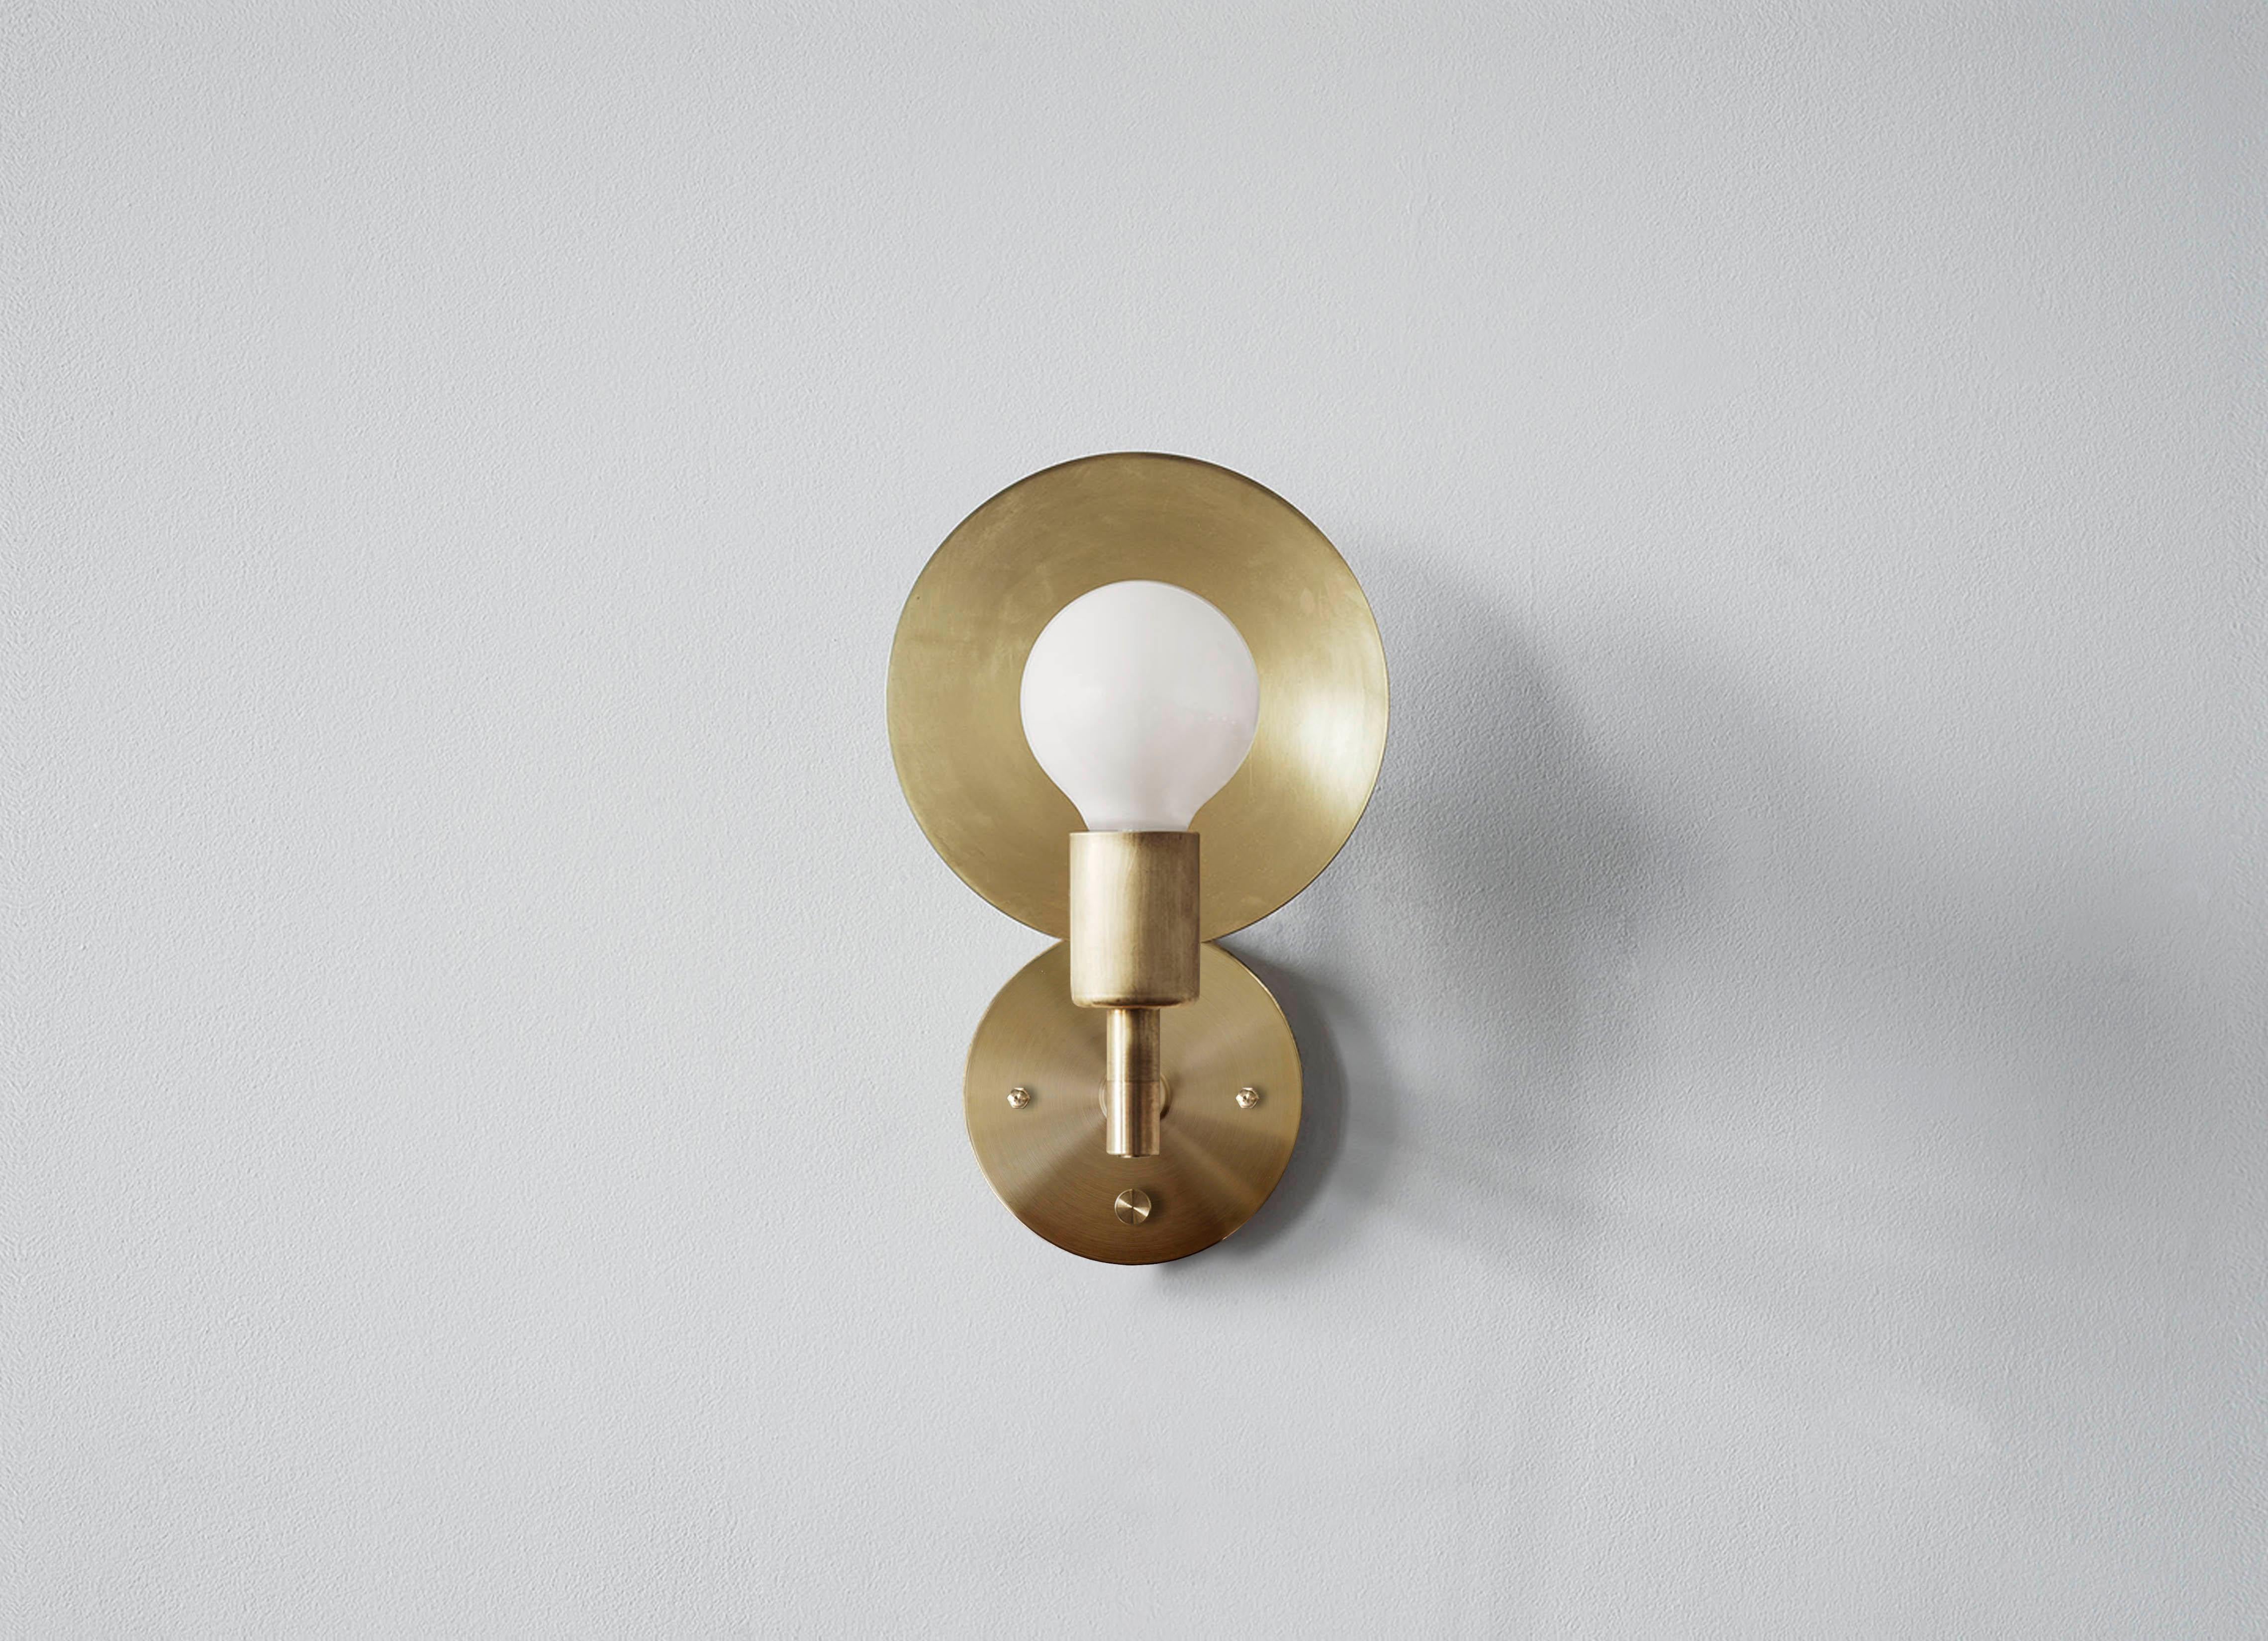 The Orbit sconce is a modern interpretation of an early American candle form with a reflective spun brass disc rotating 320 degrees, the sconce can act as both a reflector and deflector of light. The most elemental piece of the Orbit series, the